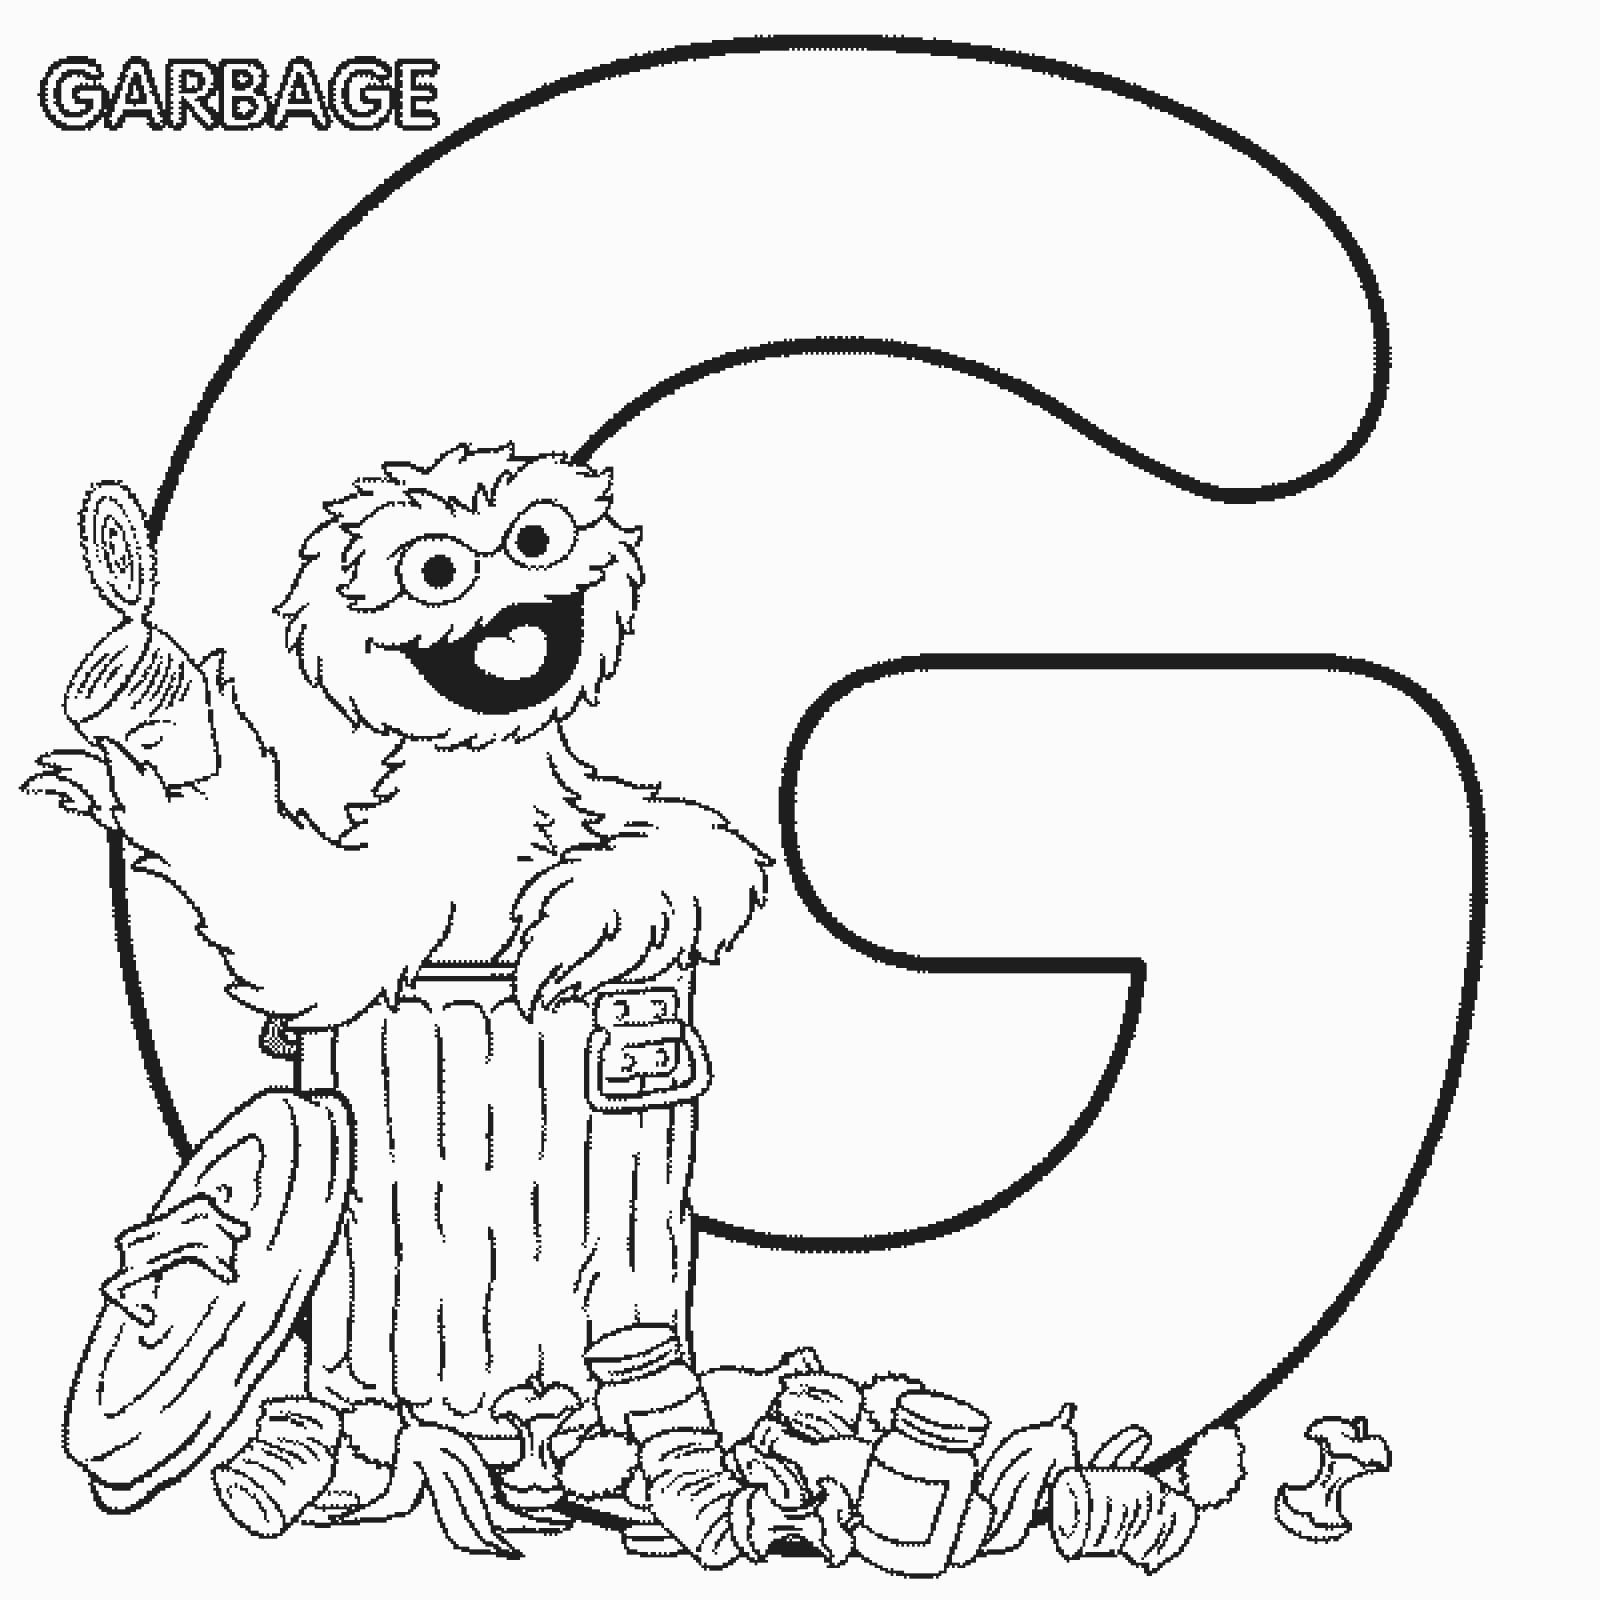 35 Sesame Street Coloring Pages - ColoringStar